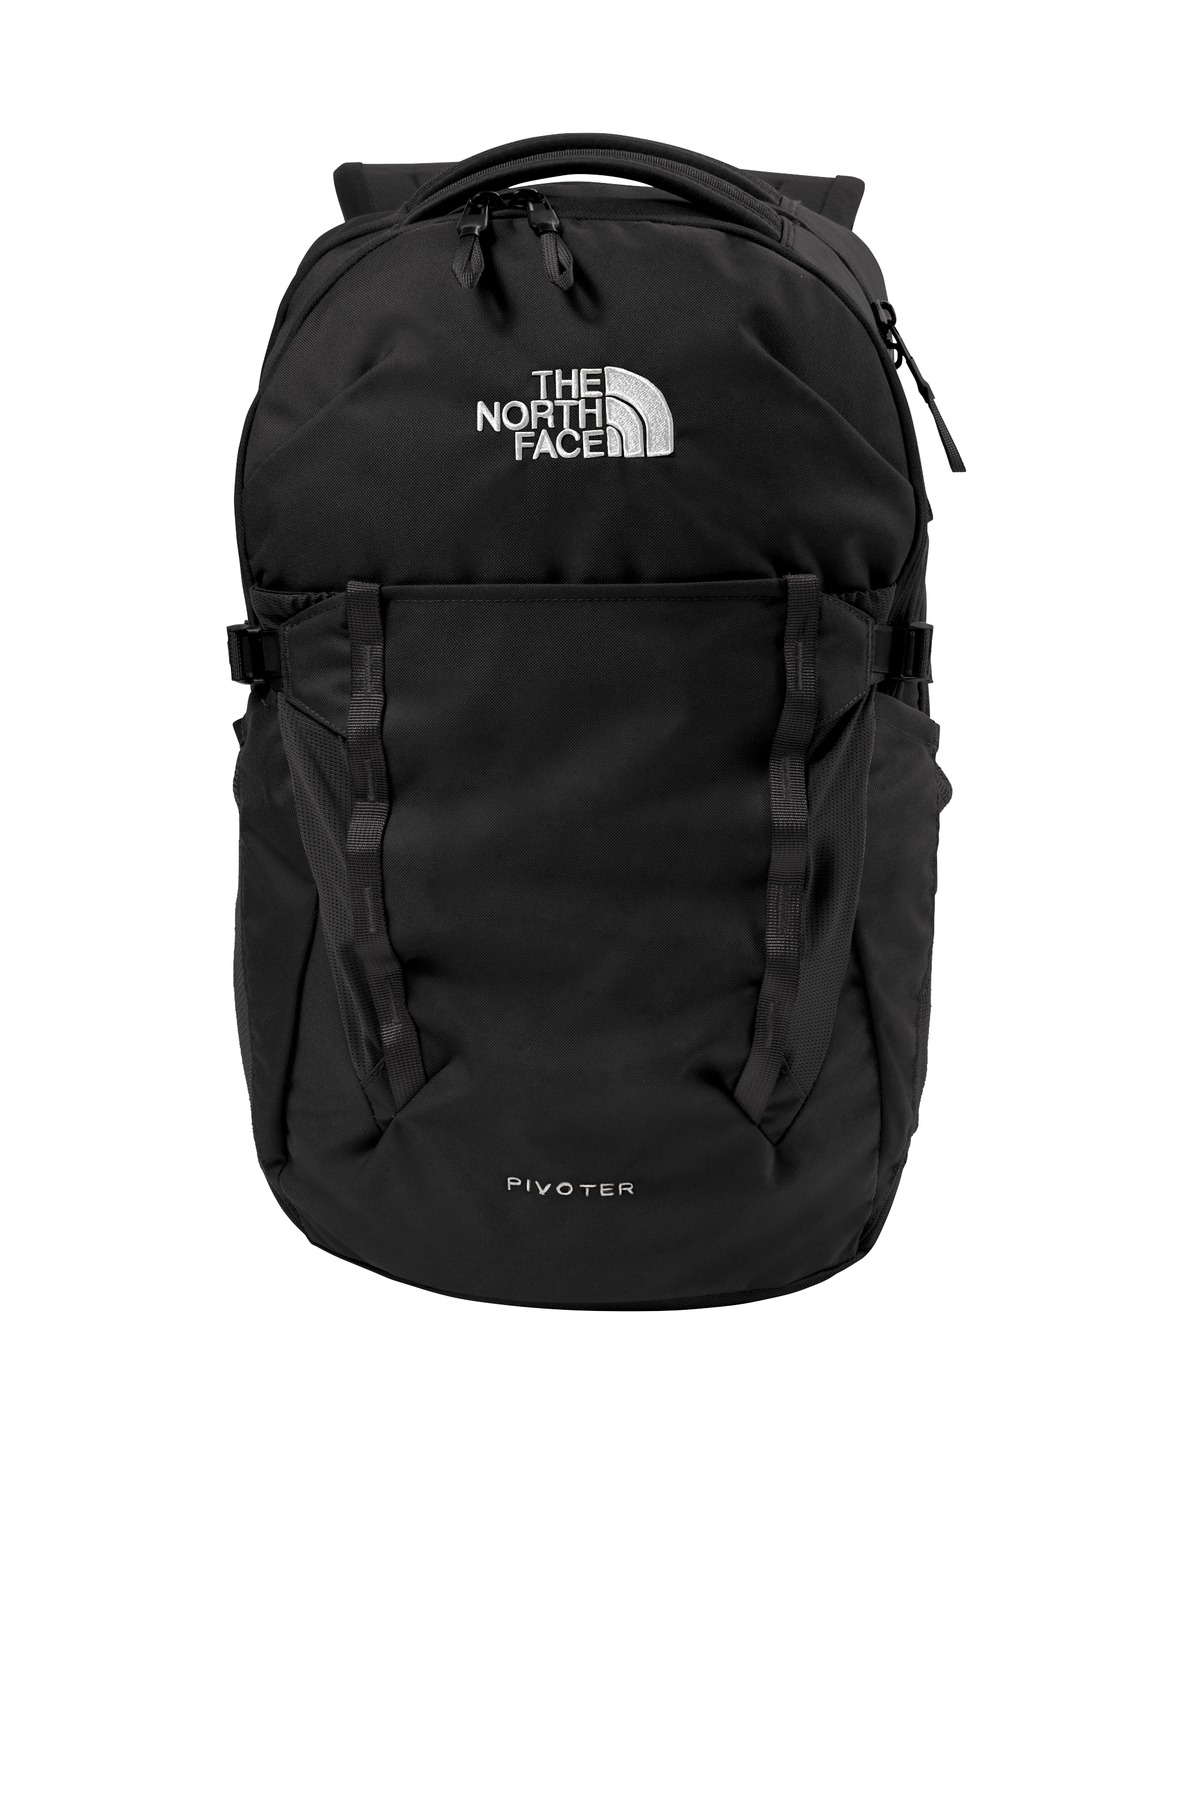 DISCONTINUED The North Face Dyno Backpack-The North Face